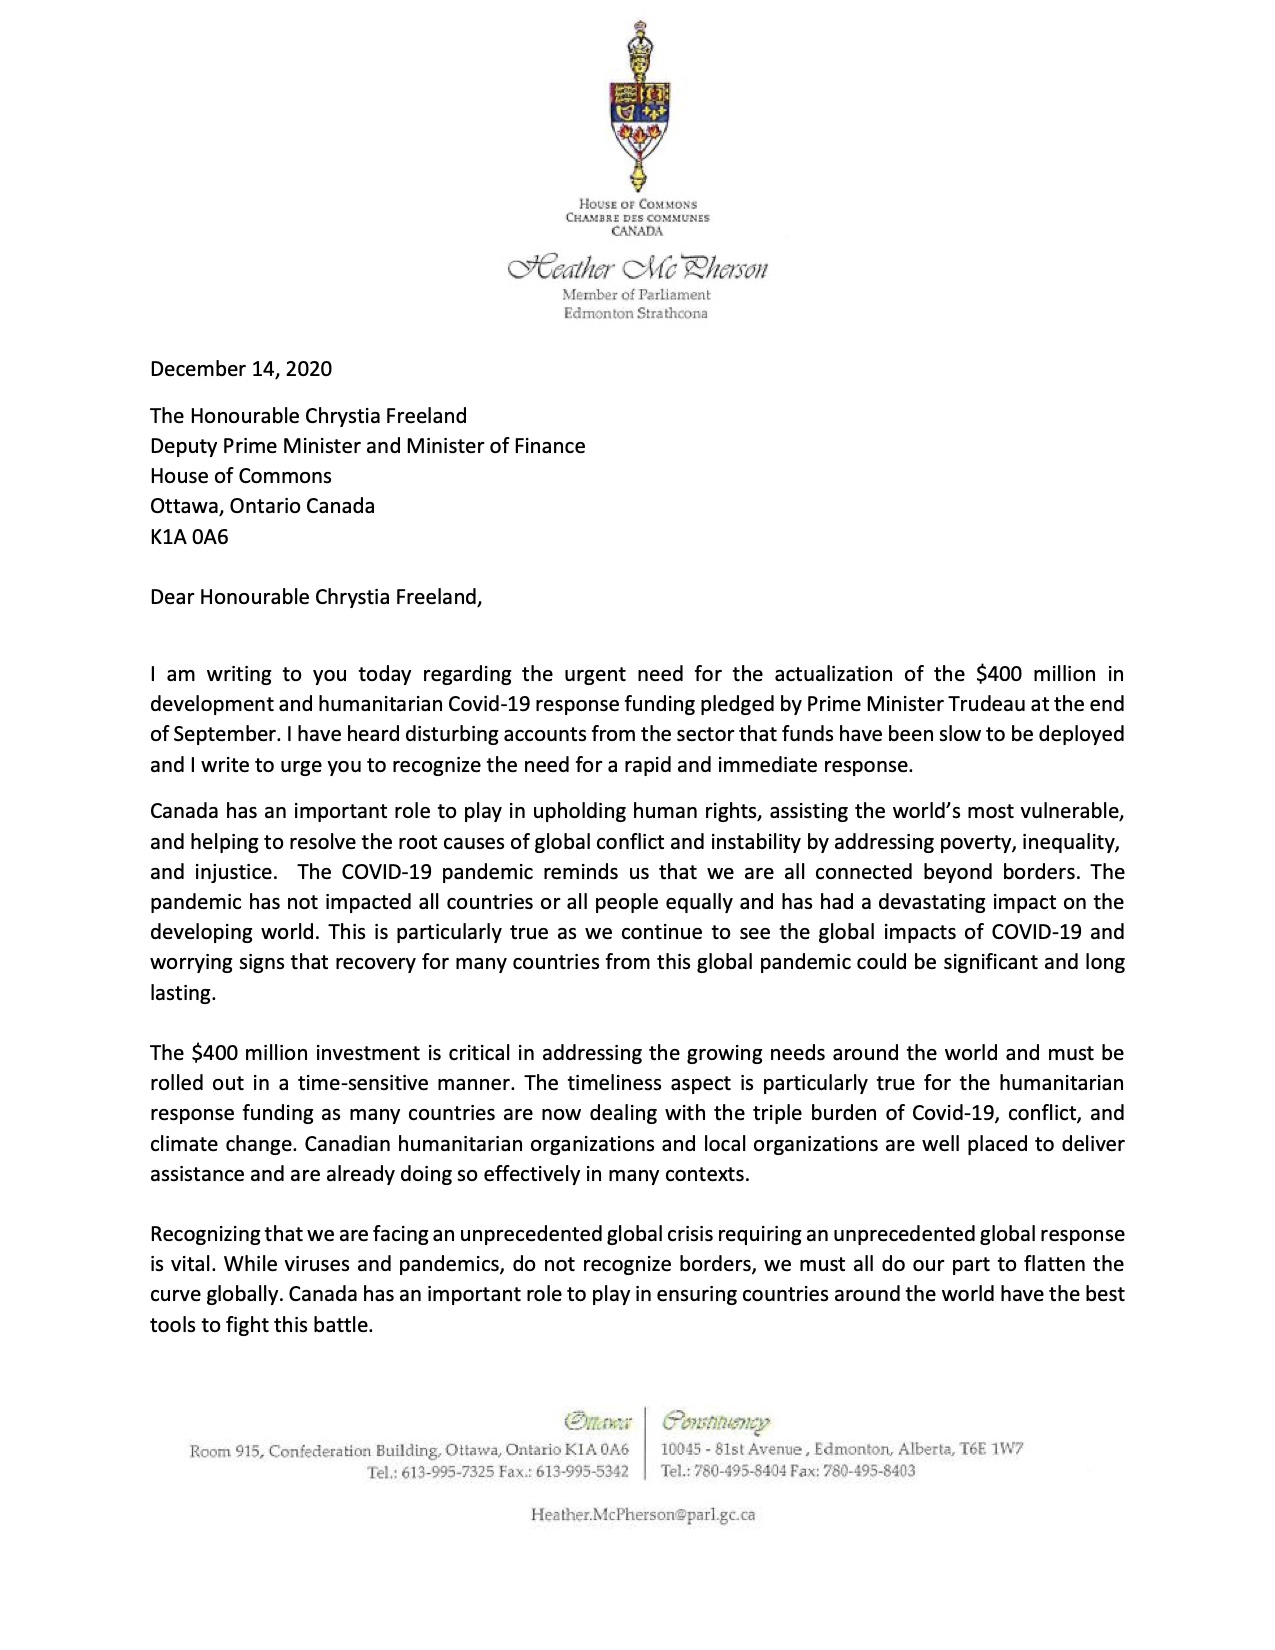 Letter to Minister Freeland, page 1